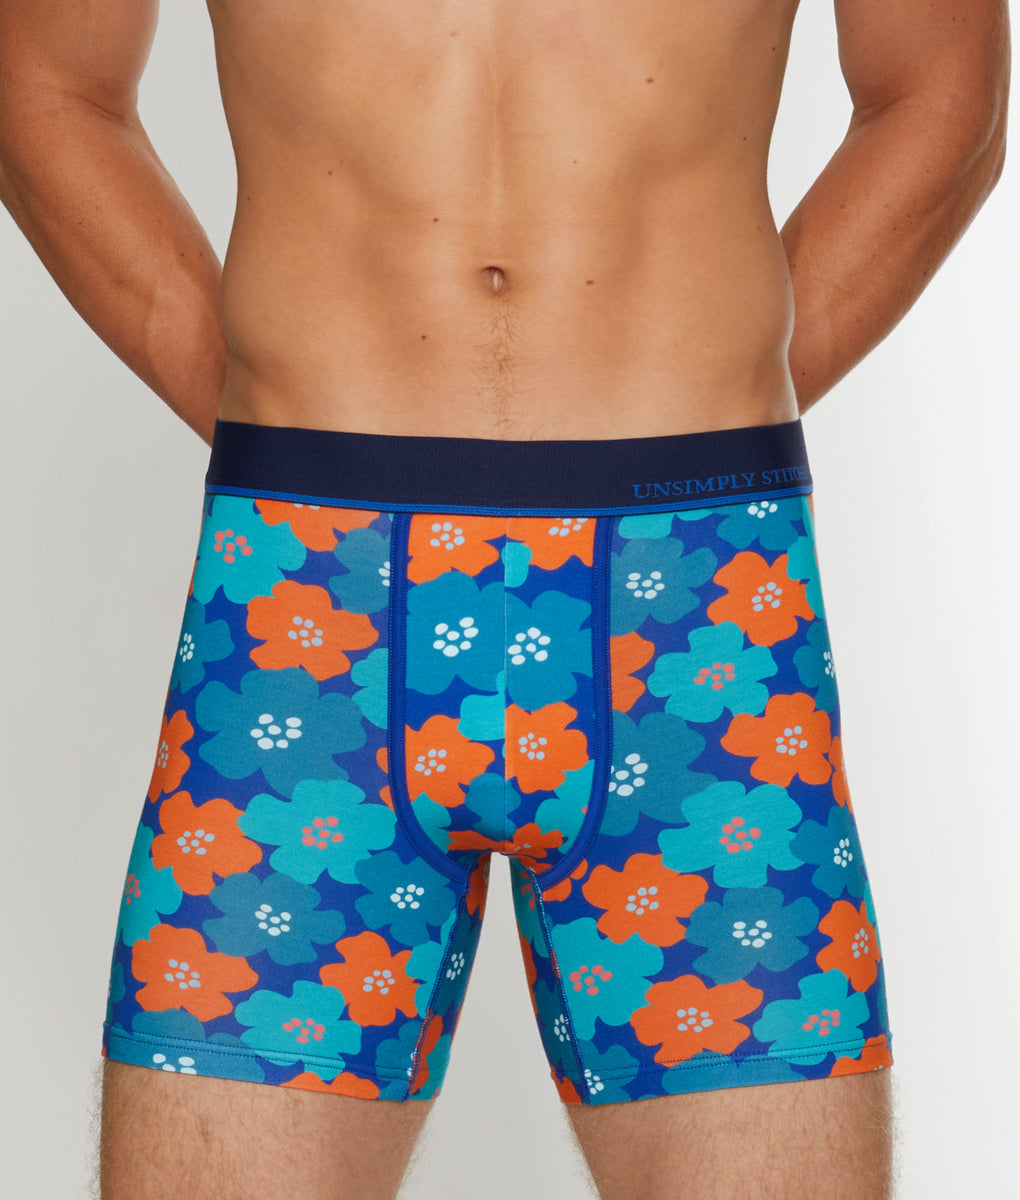 Unsimply Stitched Floral Futures Boxer Brief Unsimply Stitched Floral Futures Boxer Brief Blue-orange